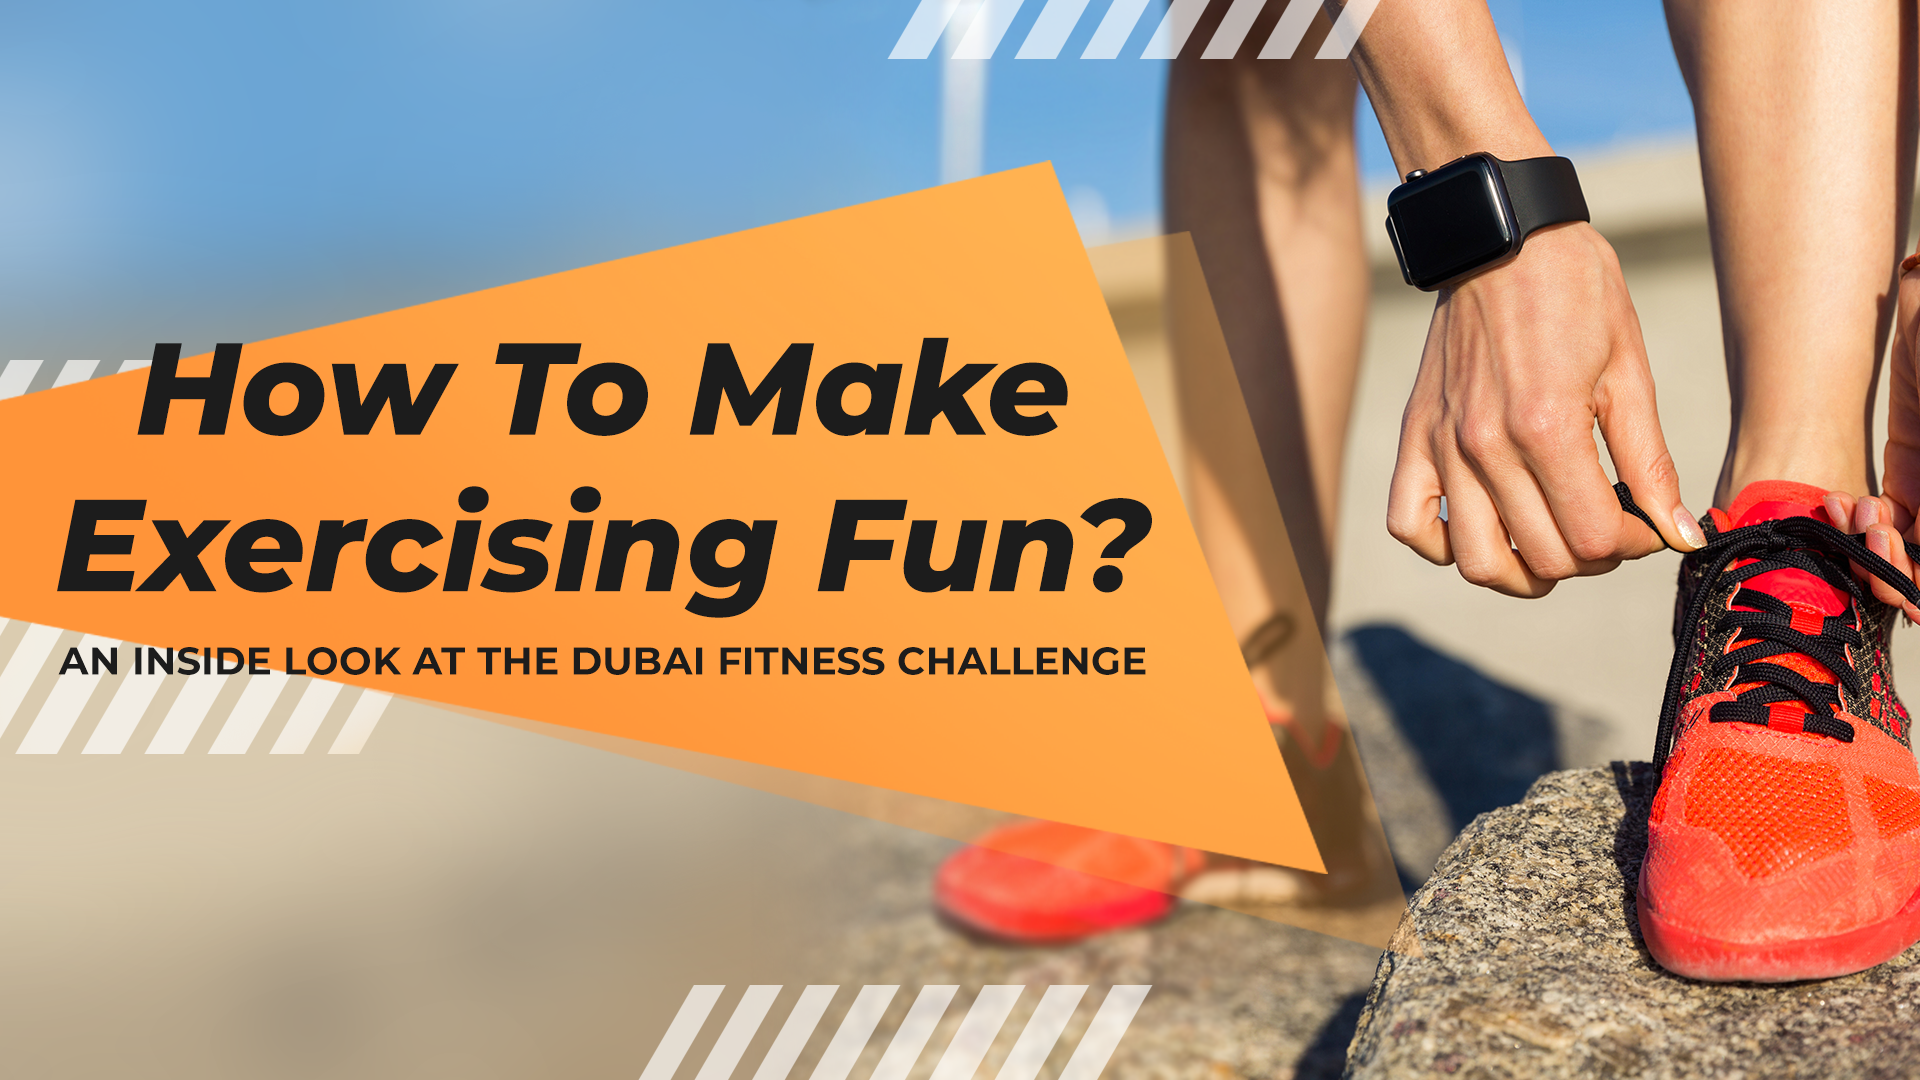 How To Make Exercising Fun? An Inside Look At The Dubai Fitness Challenge